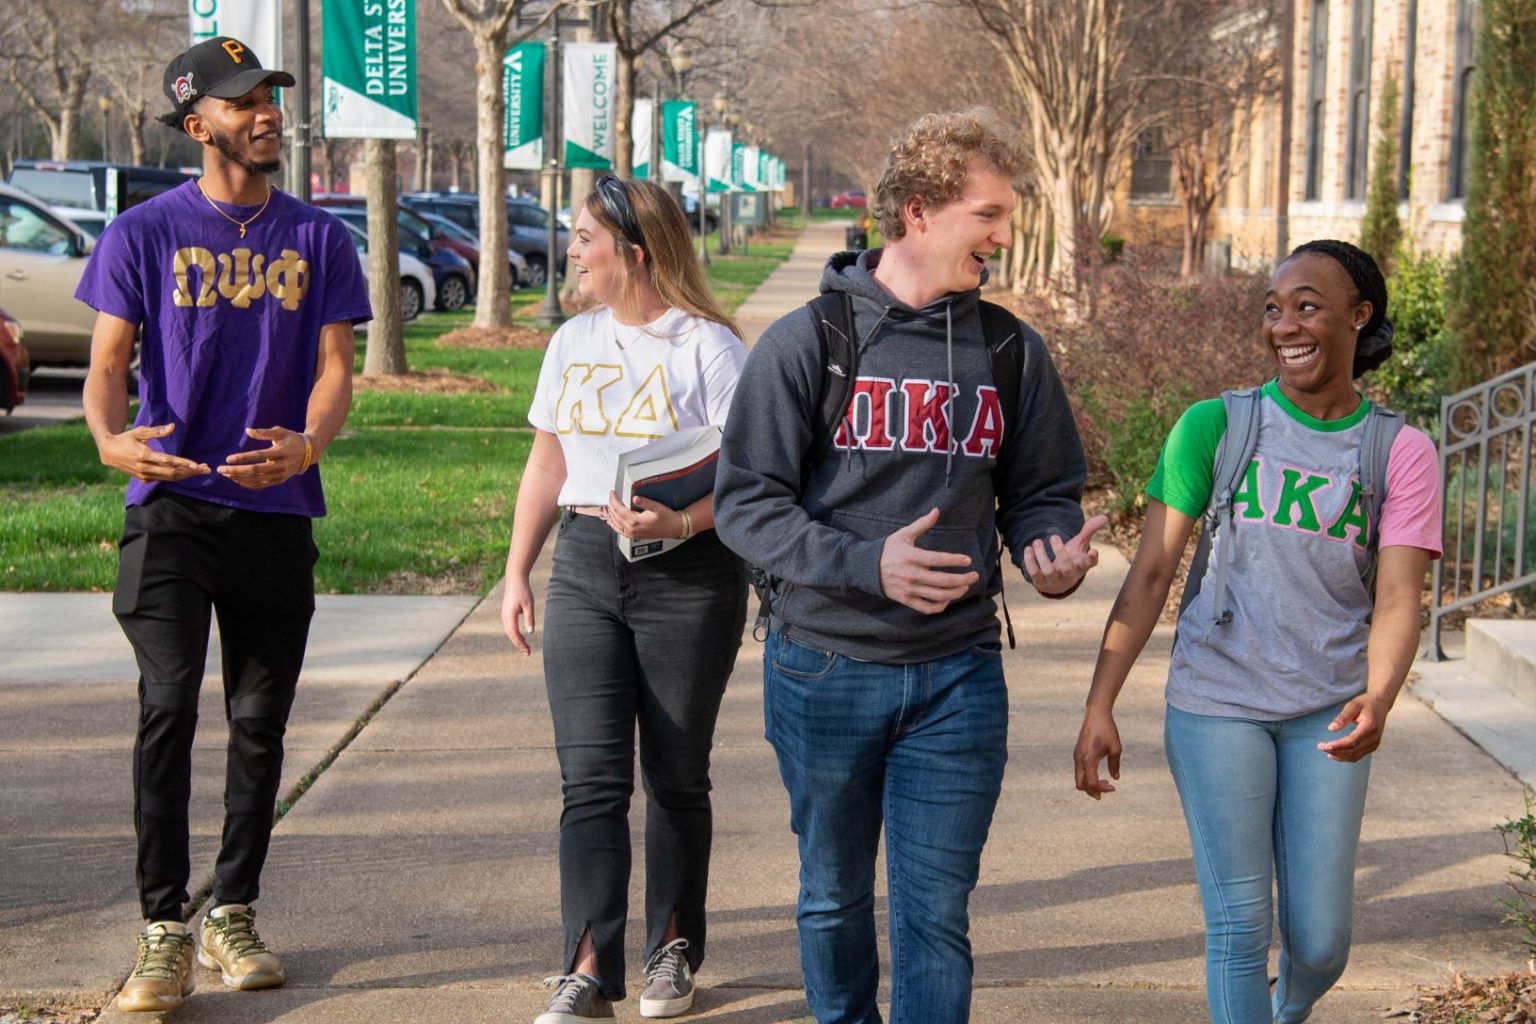 Greek Life students walking and engaging with each other on campus.